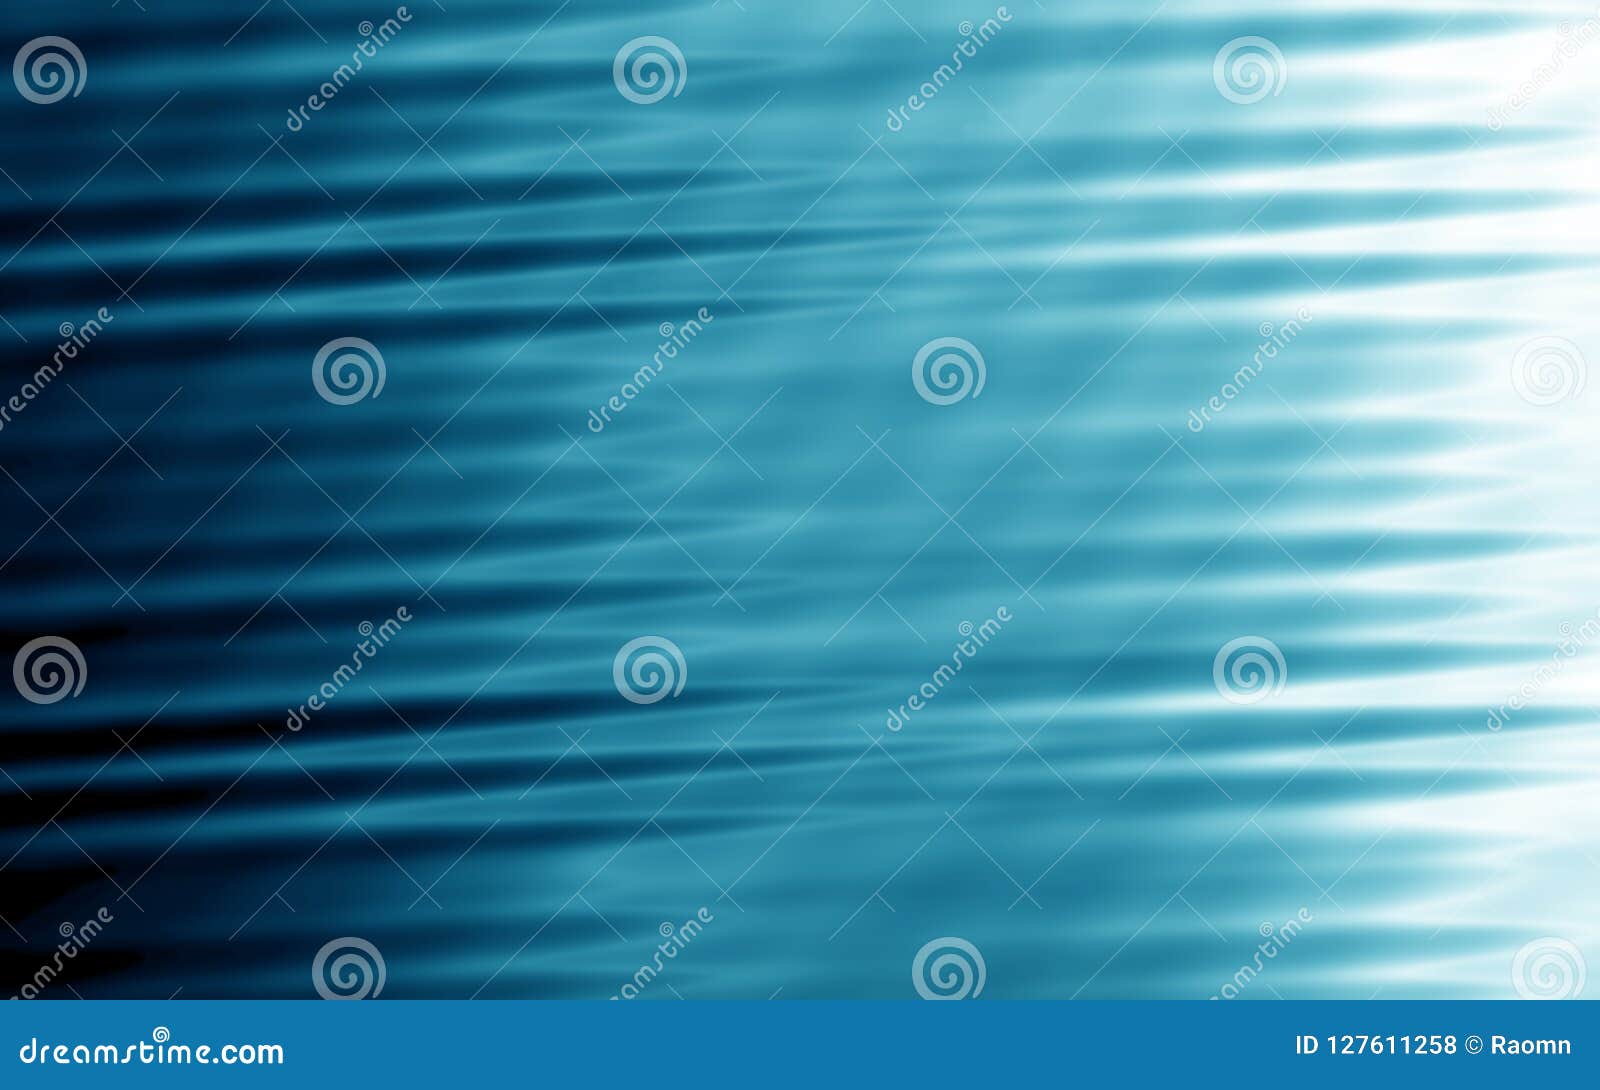 Background Abstract Force Explosion Design Stock Illustration ...